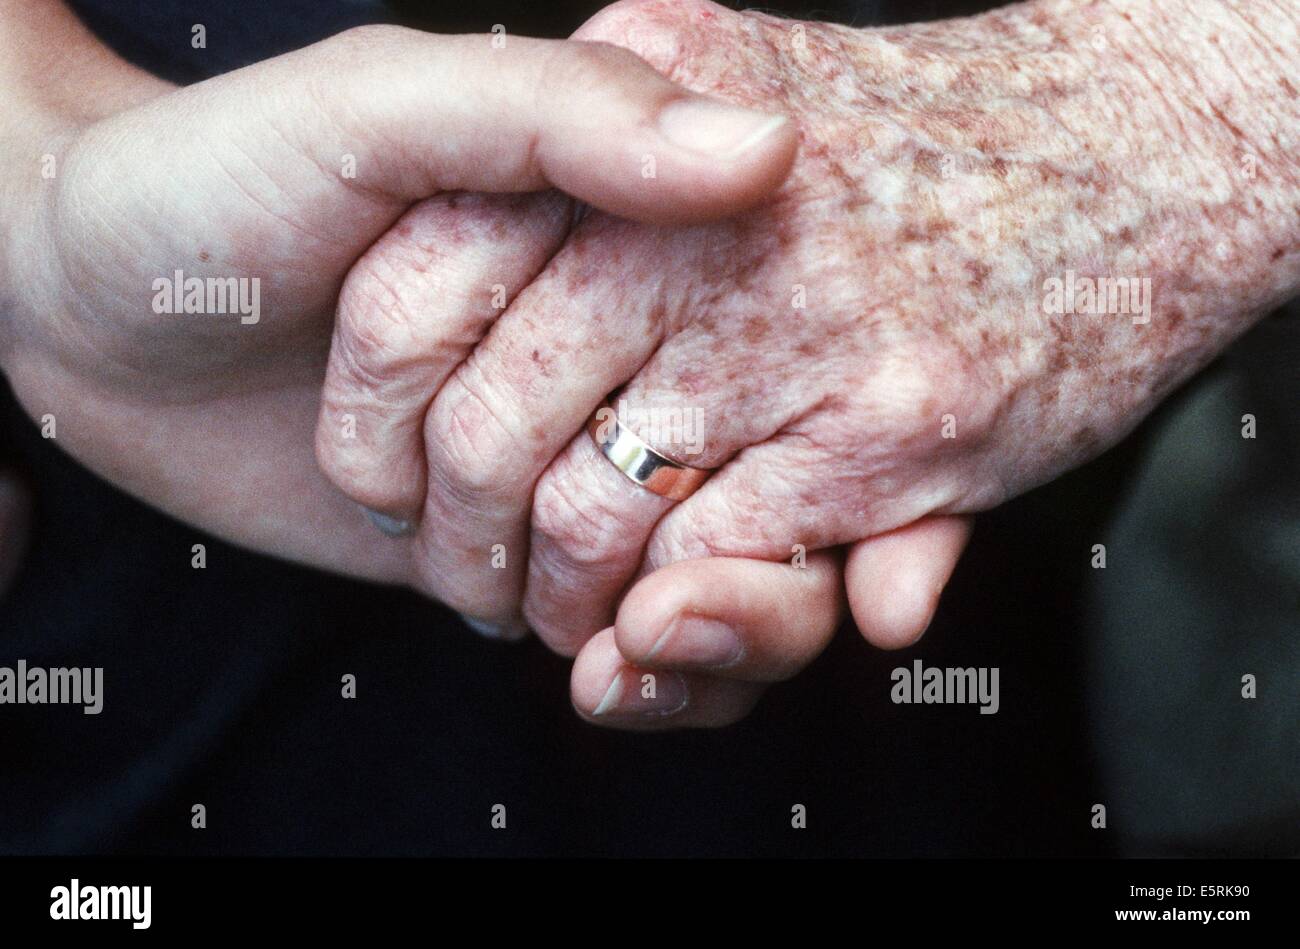 Geriatric care, close up of young and elderly women's hands. Stock Photo